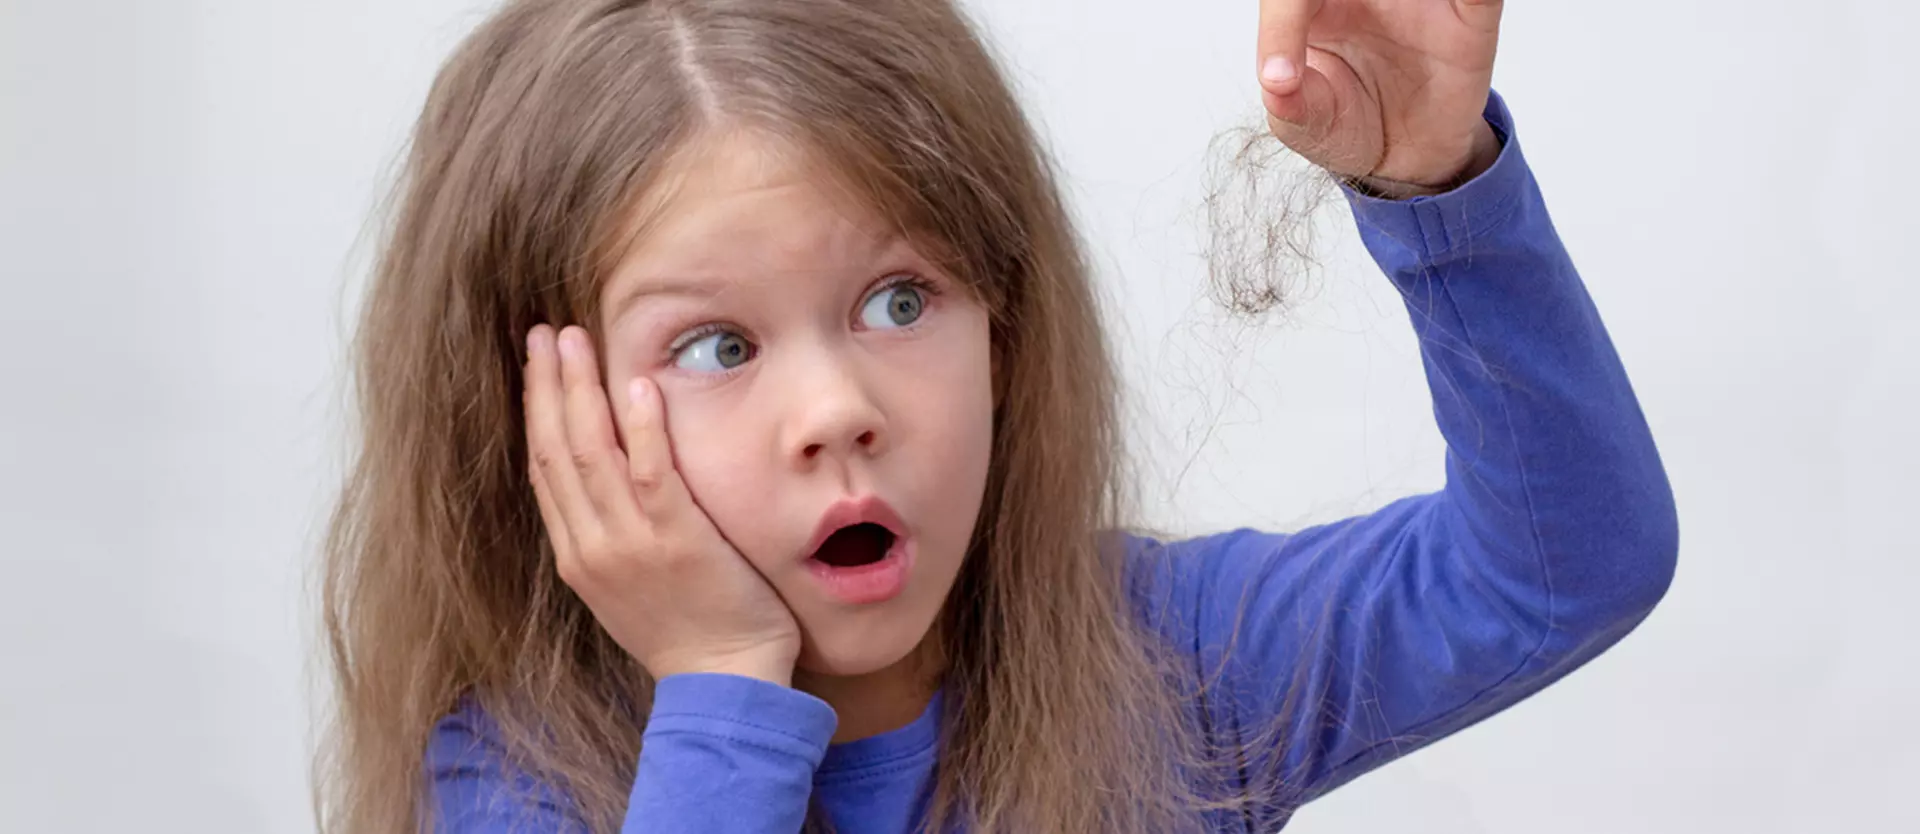 Hair Loss Causes in Children 